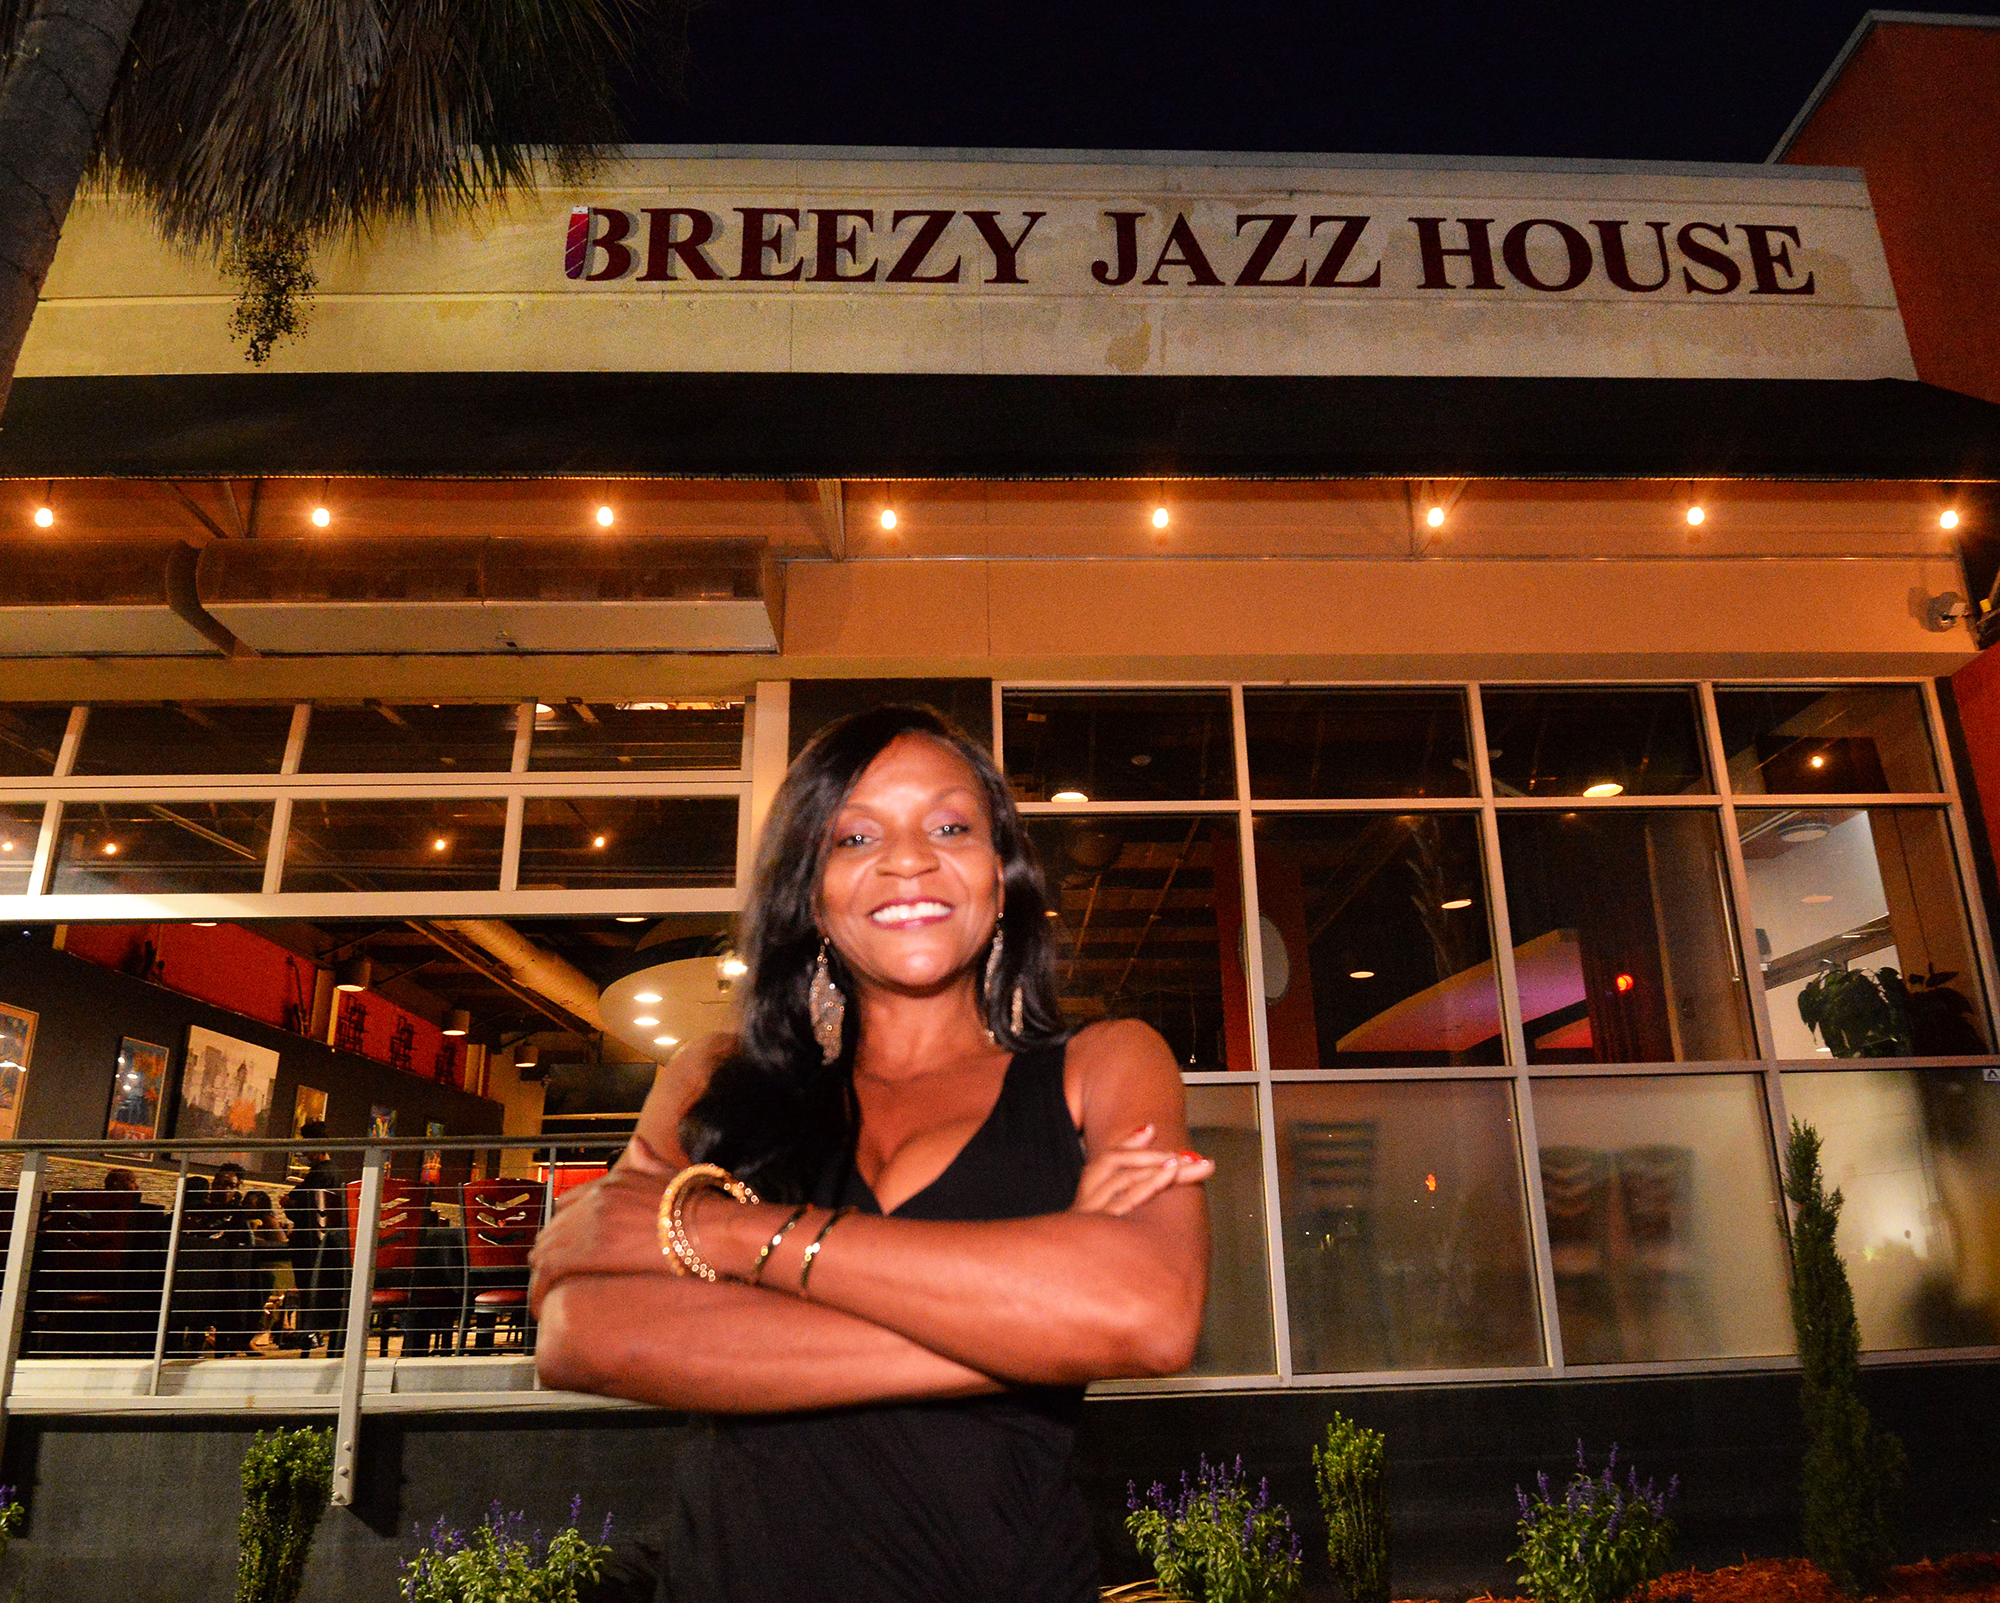 Breezy Jazz House in San Marco at 1402 San Marco Blvd.